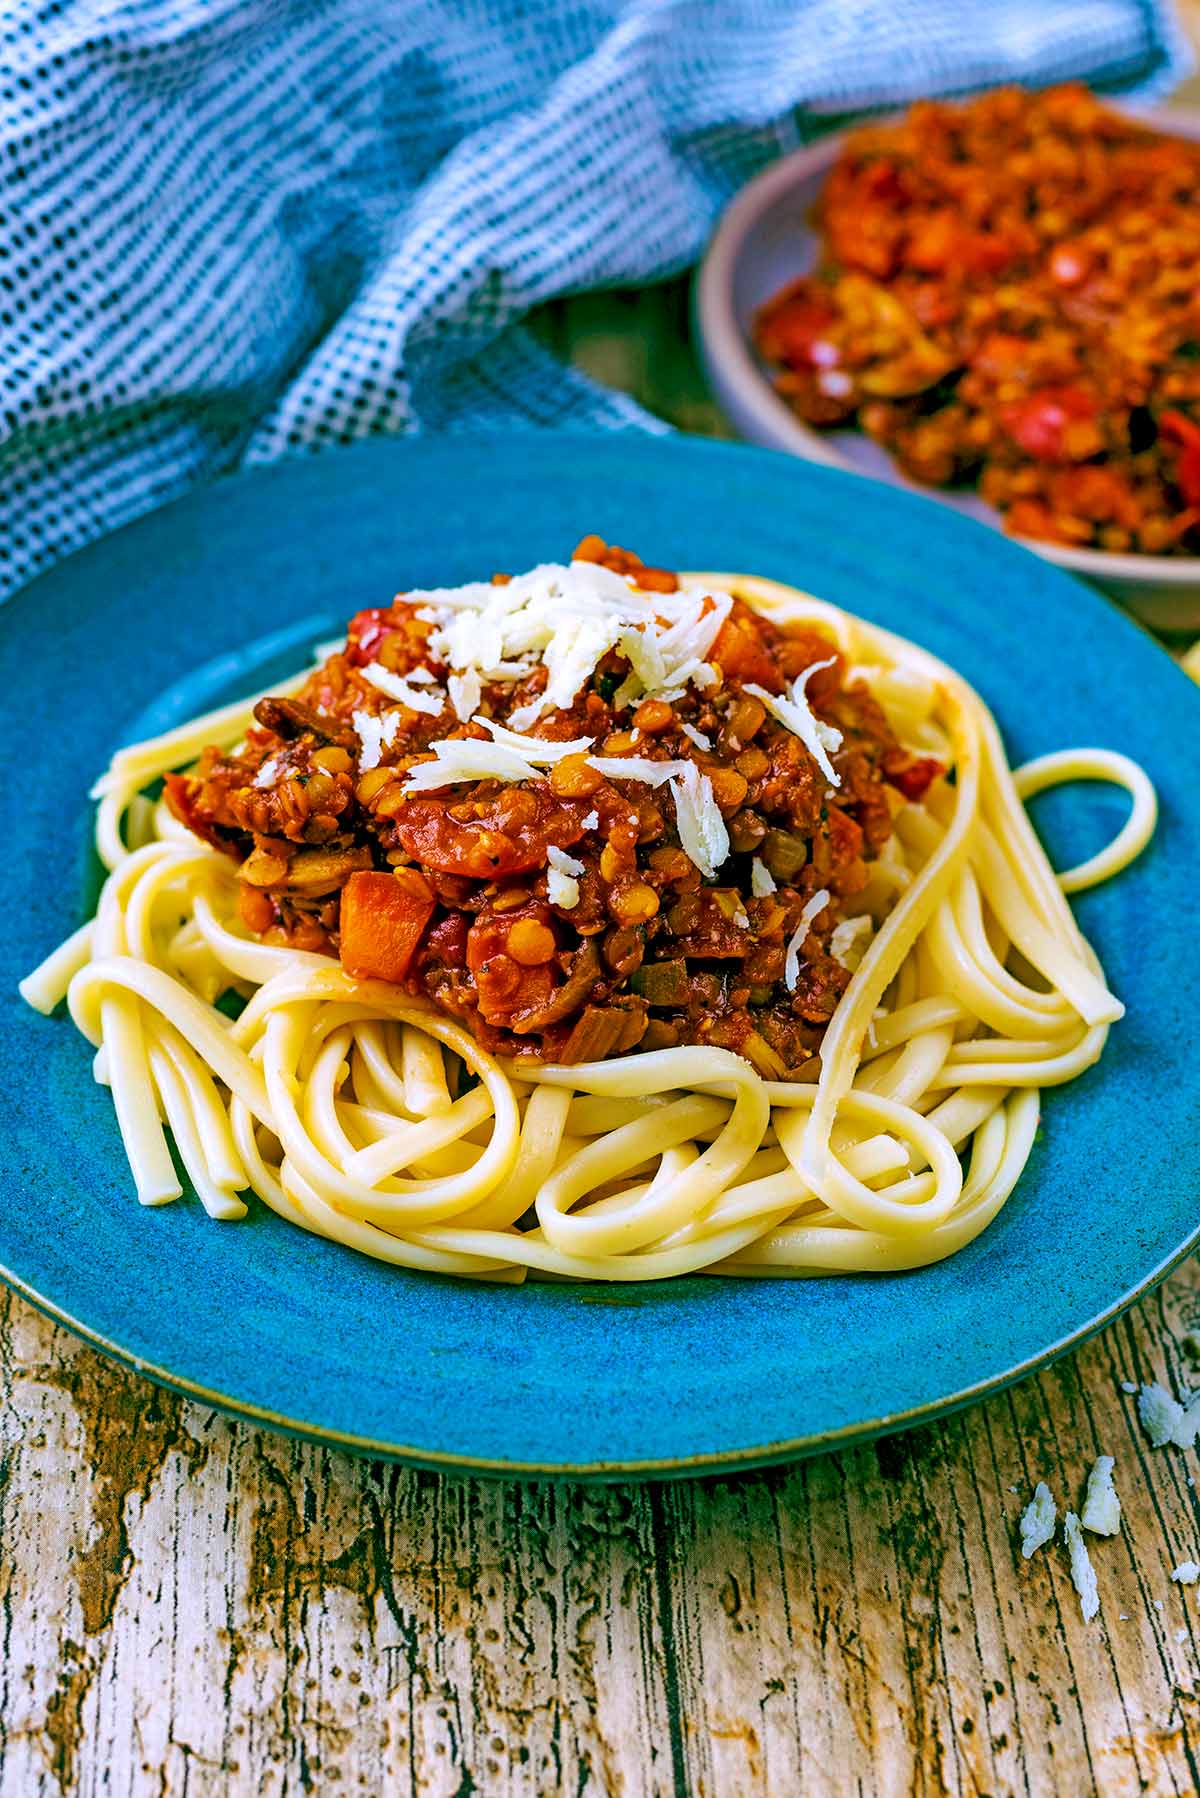 A plate of pasta and lentil bolognese in front of a spotted towel and more bolognese.